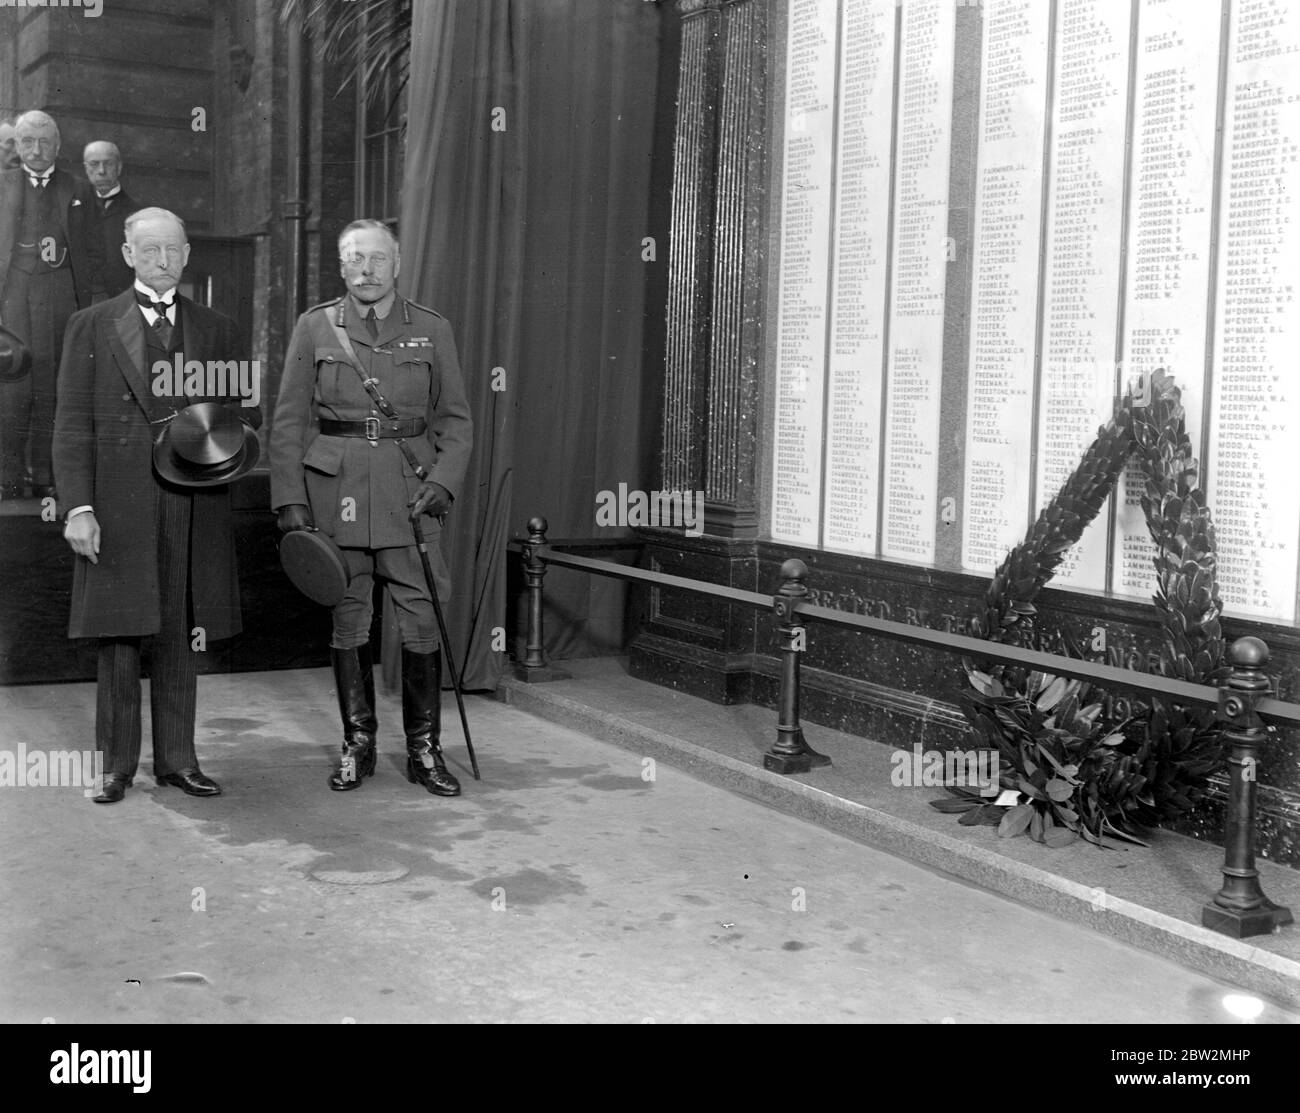 Lord Haig unveils Memorial to G.B.R. Men at King's Cross with Sir Fredrick Banbury. Haig, Douglas (1st Earl Haig) British general and marshal; led British armies in France in World War I 1915-1918  1861-1928 Stock Photo